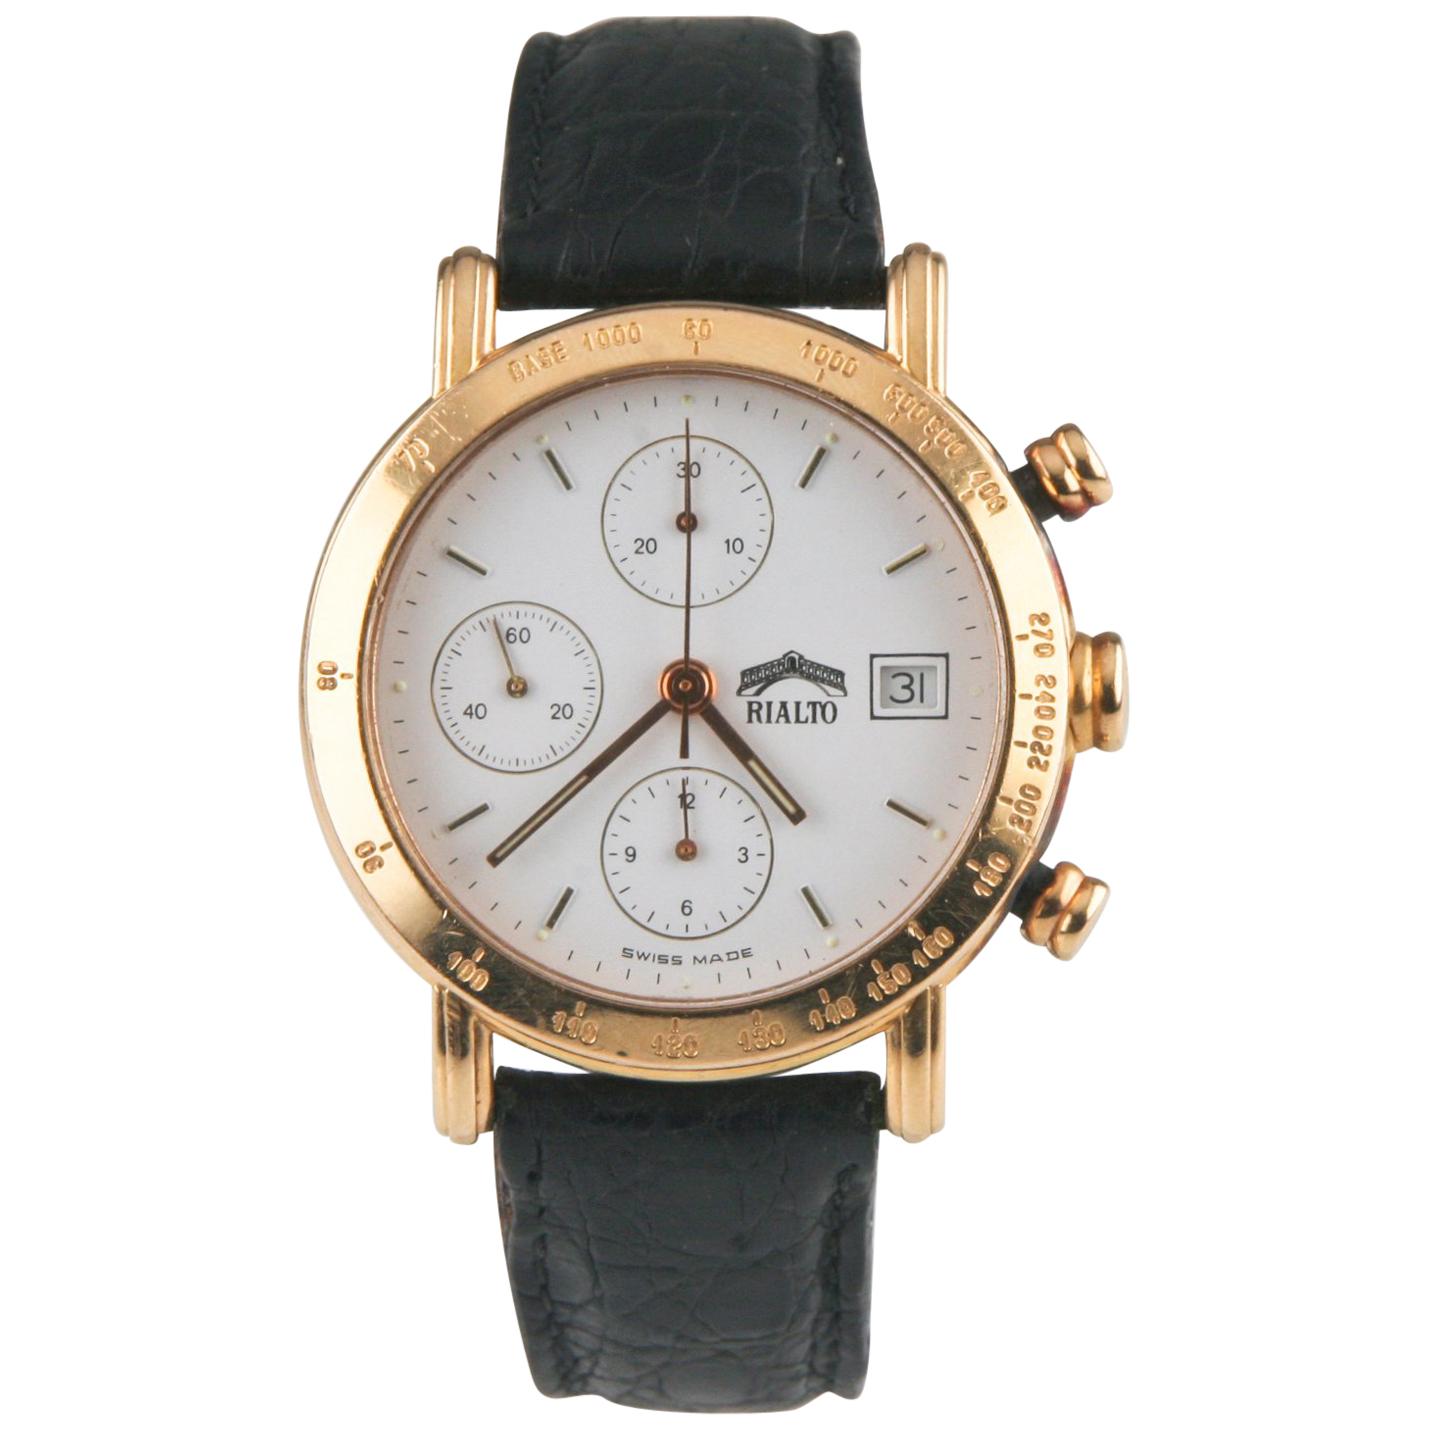 Rialto Chronograph 18 Karat Gold Automatic Watch with Date and Leather Band